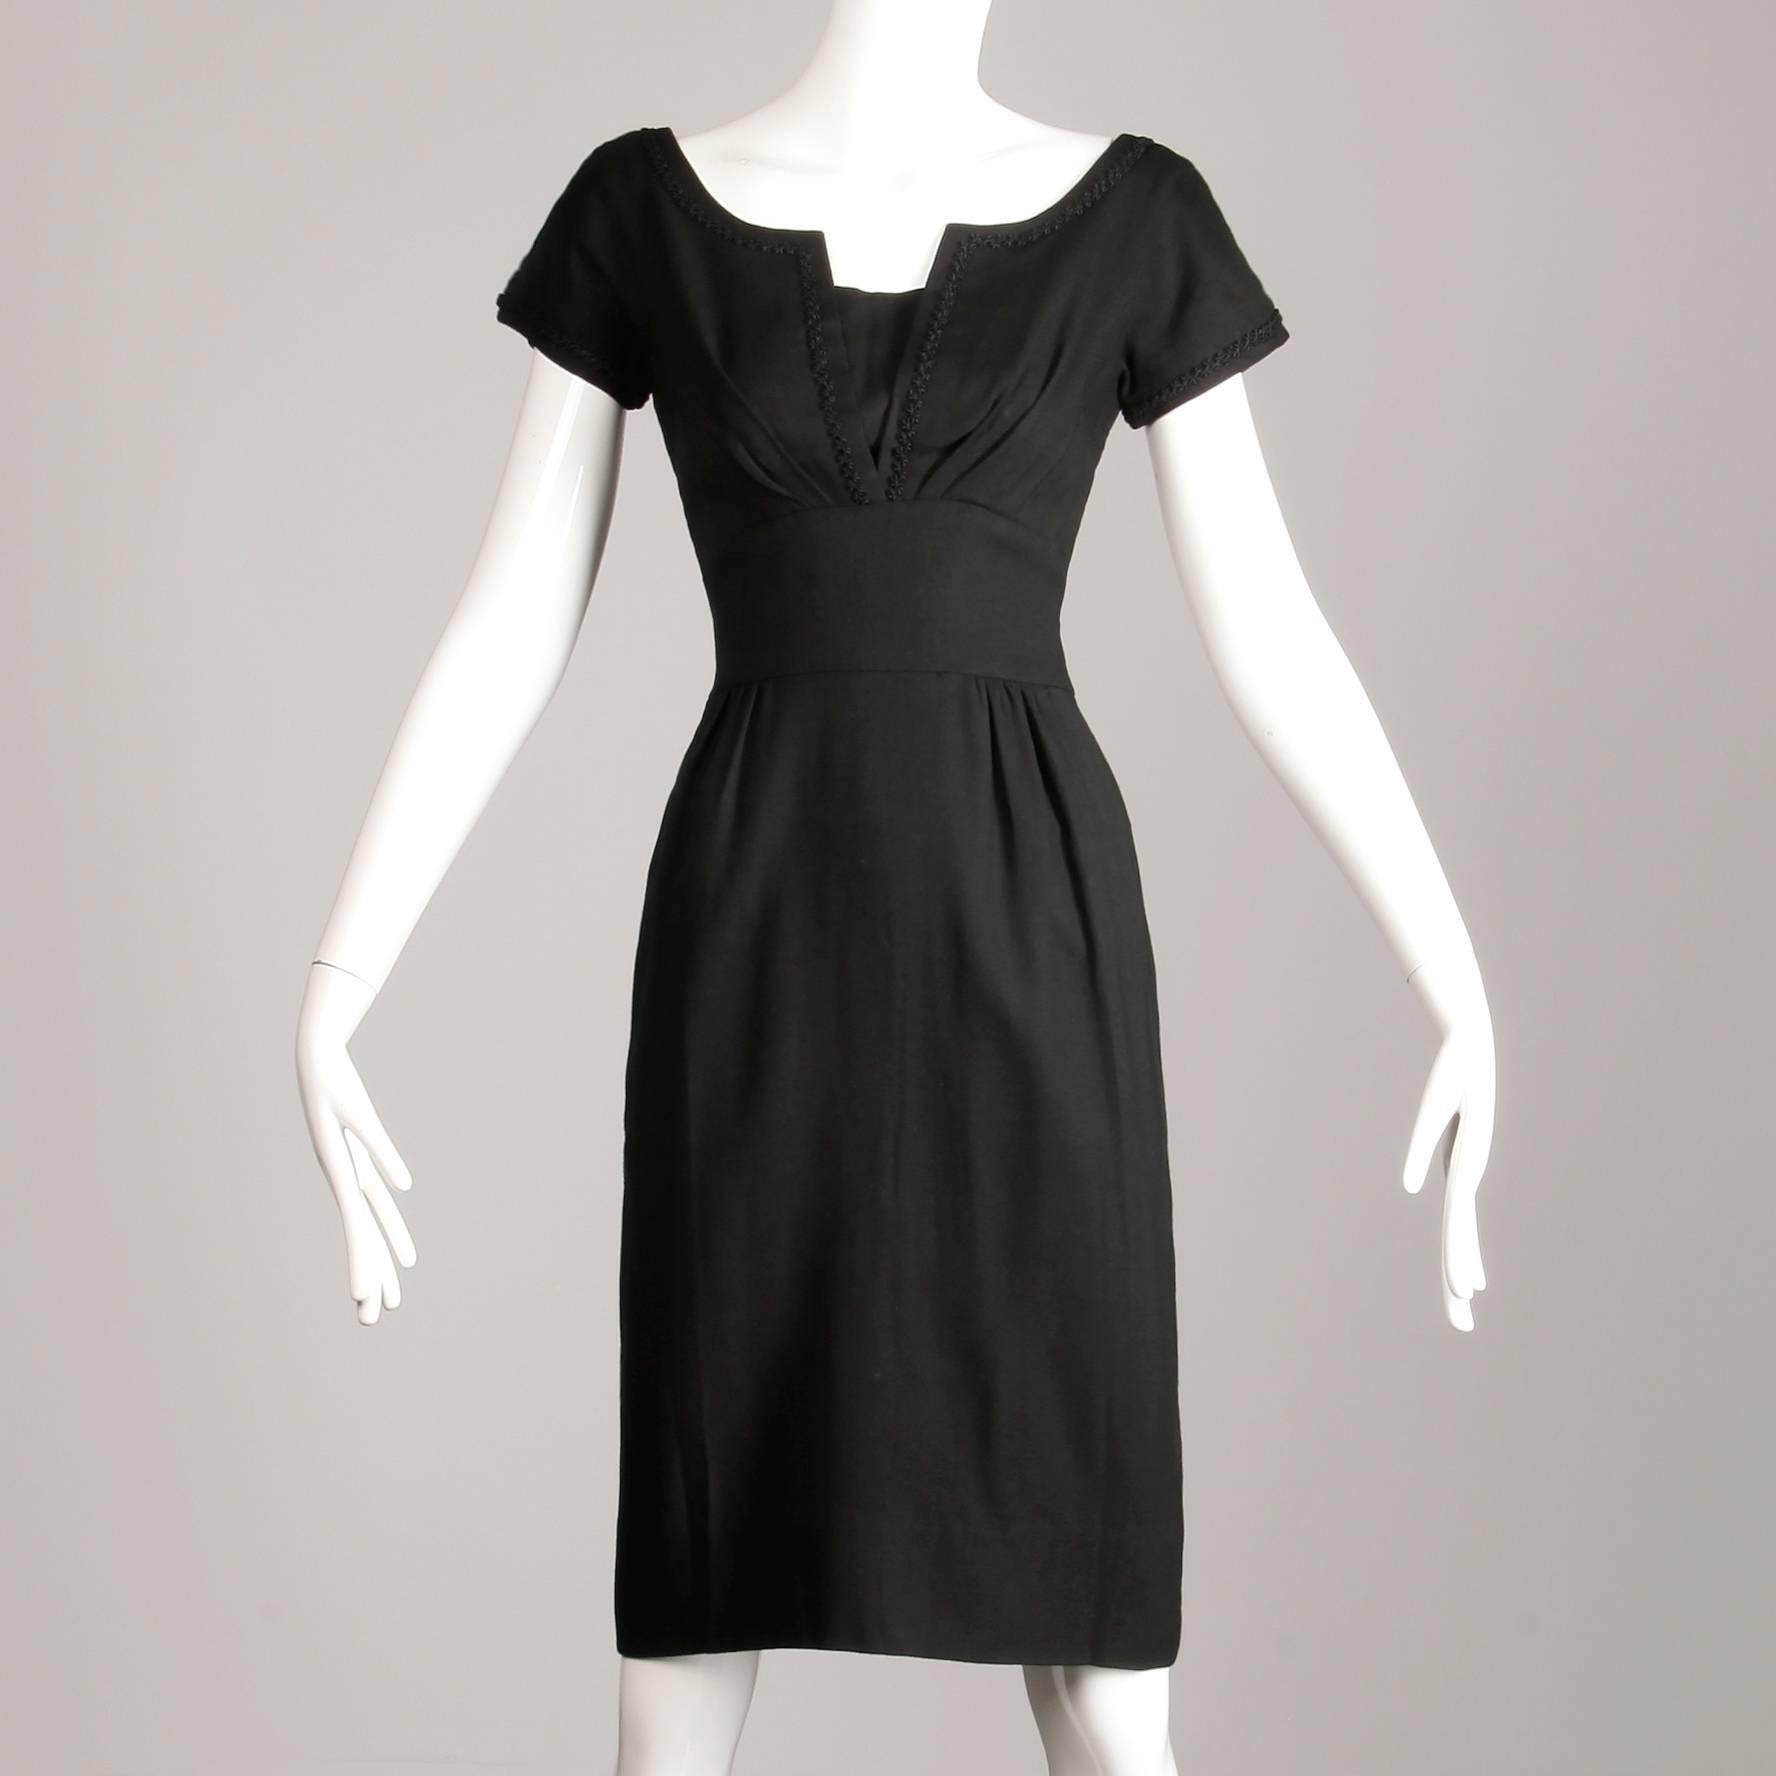 Flattering vintage 1950s sheath dress with shelf bust by Peck & Peck. Unlined with rear metal zip and hook closure. The bust measures 36